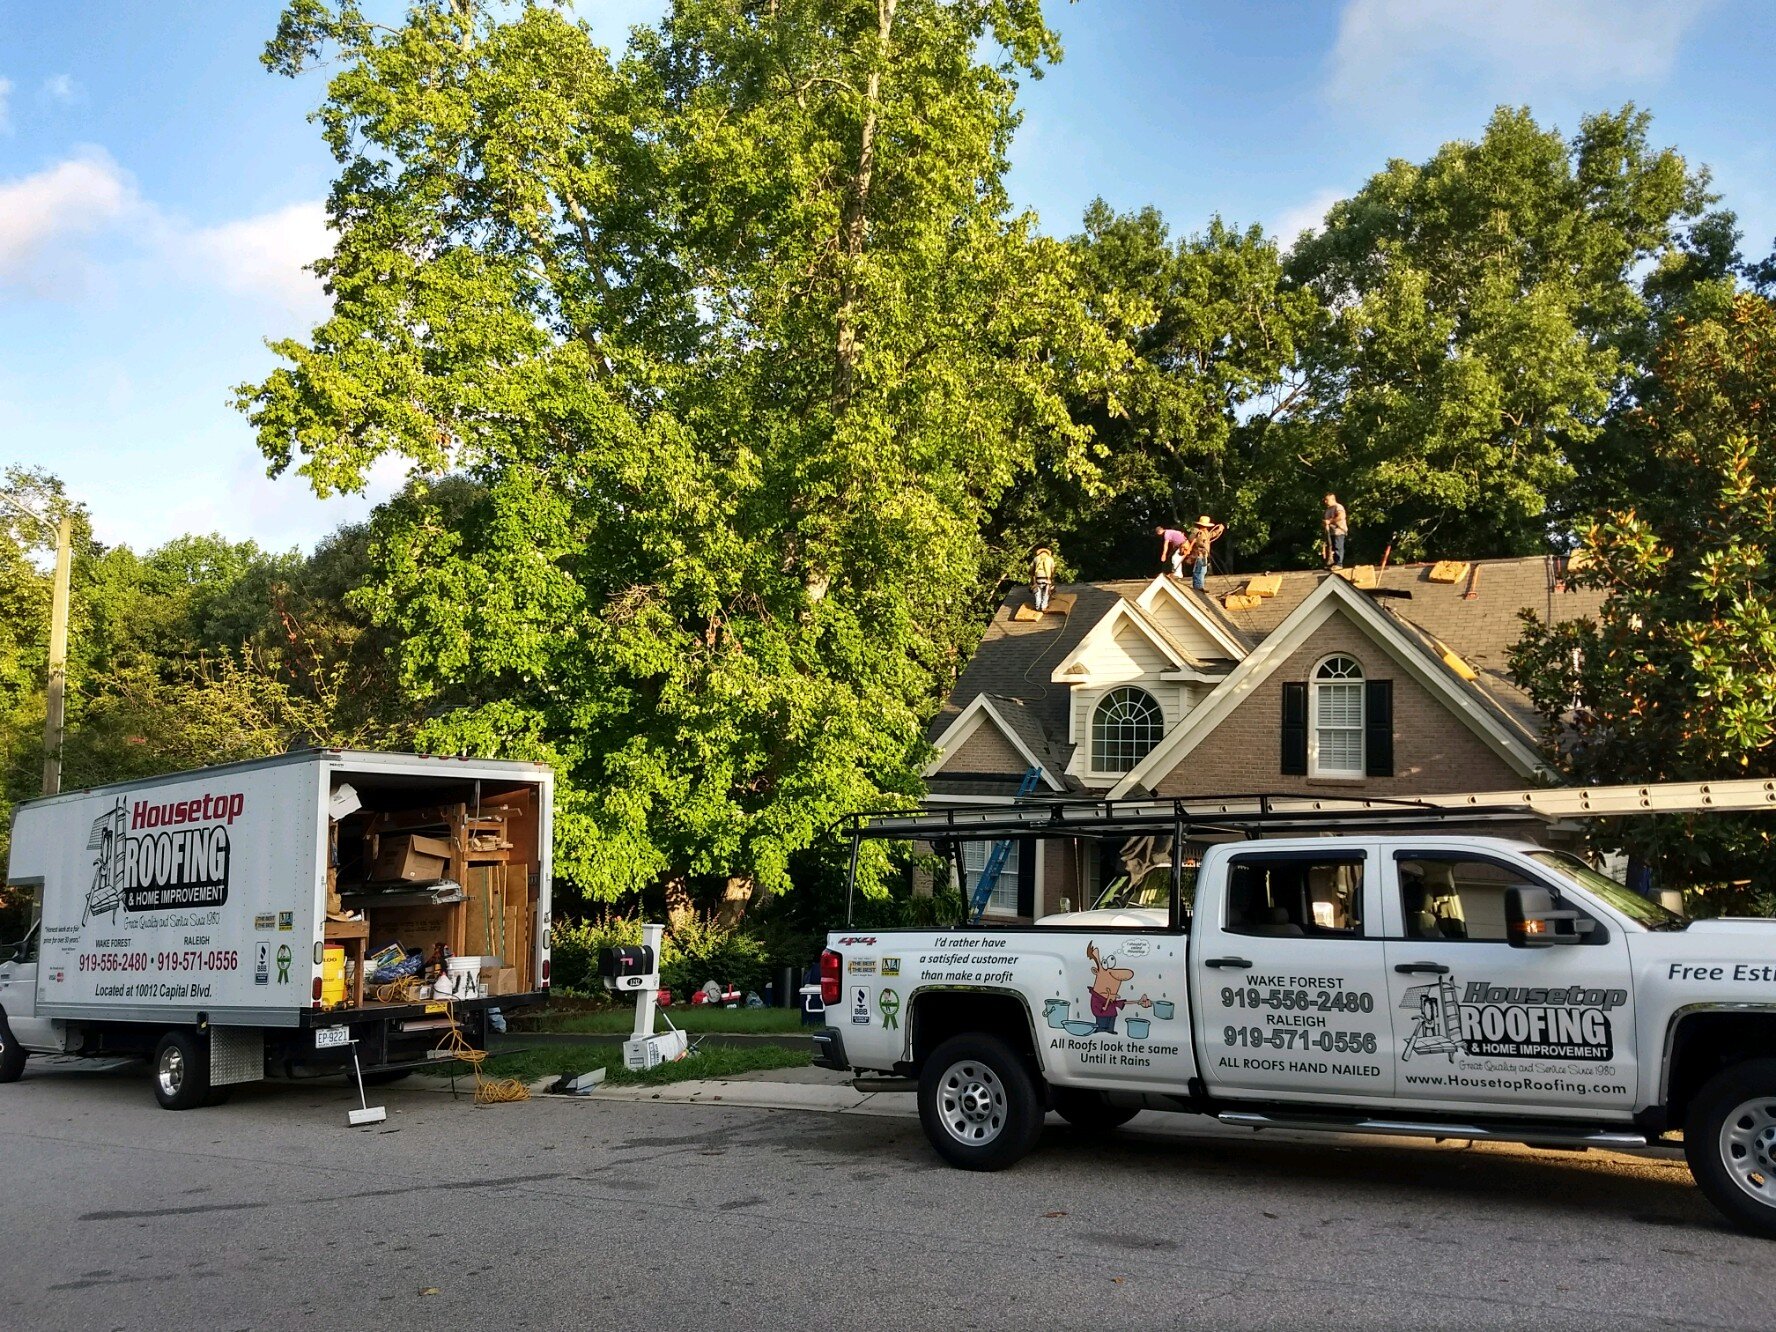 Housetop Roofing and their work trucks roofing another home in Wake Forest, NC.